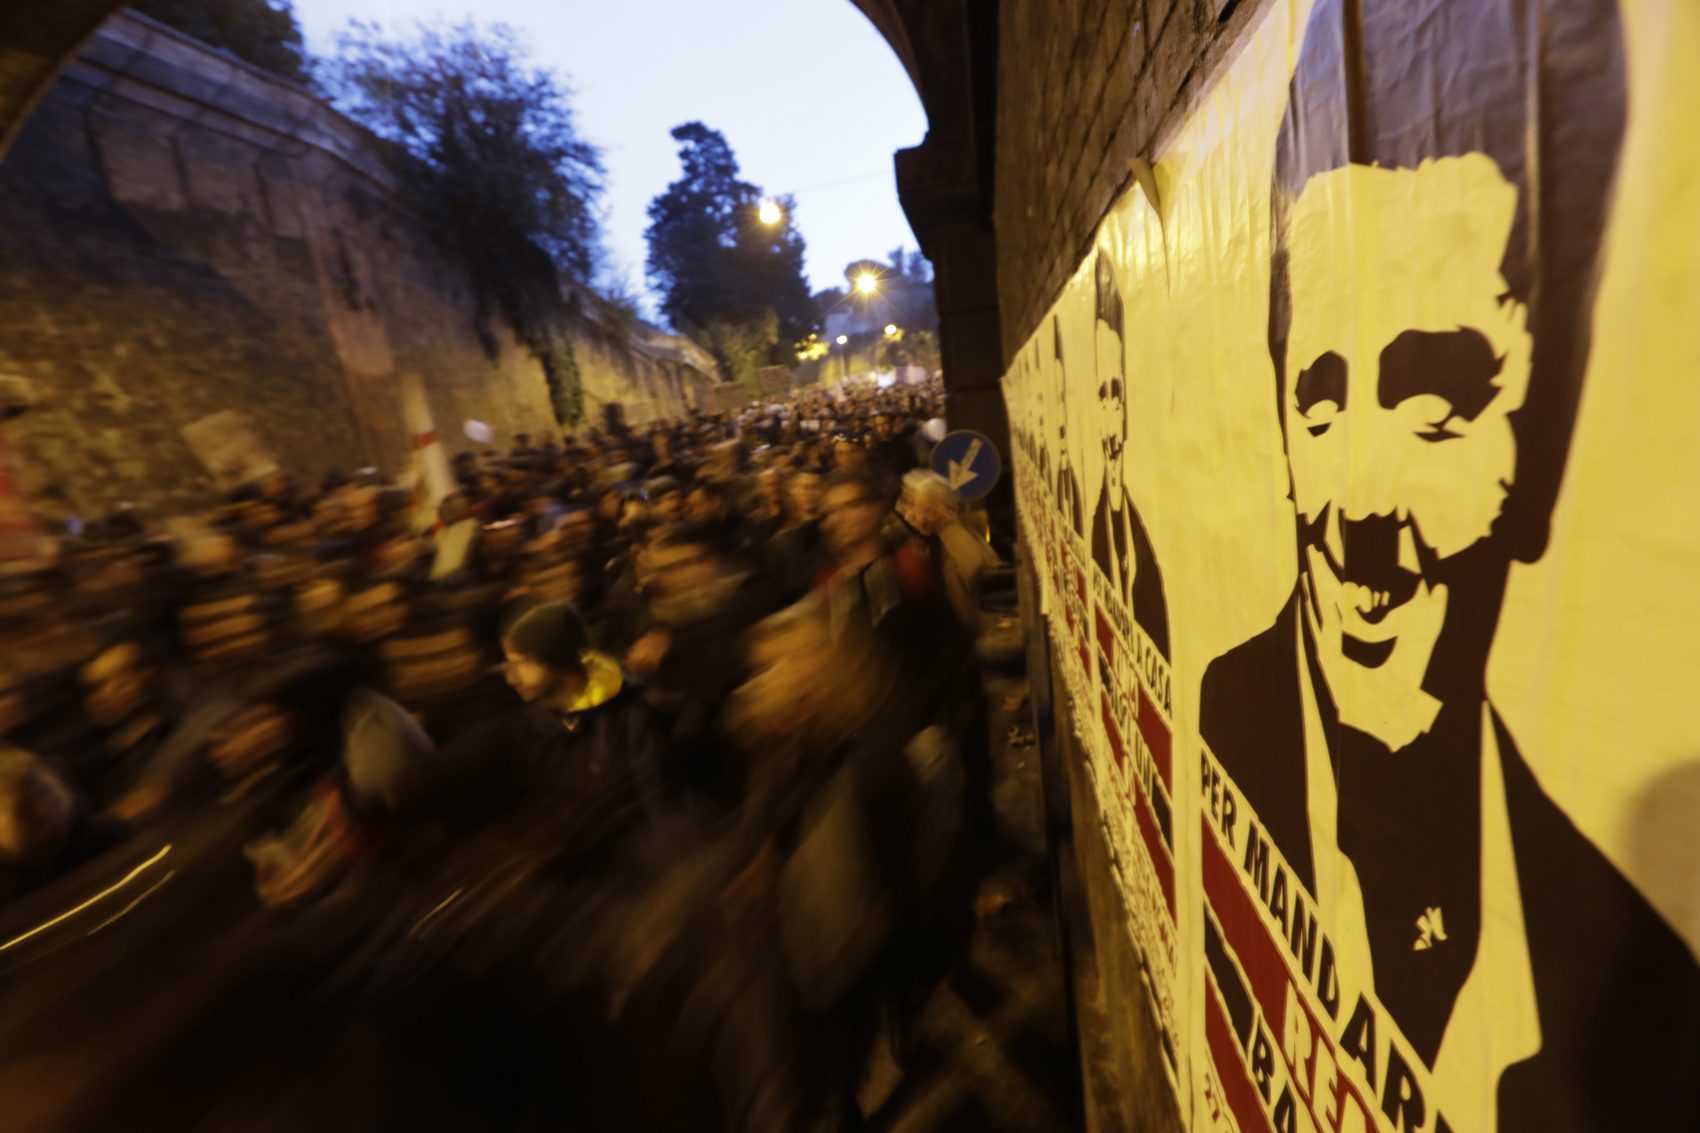 Protesters march past a poster depicting Italian Premier Matteo Renzi during a demonstration ahead of a referendum over a constitutional reform, in Rome, Sunday, Nov. 27, 2016. (Andrew Medichini/AP)